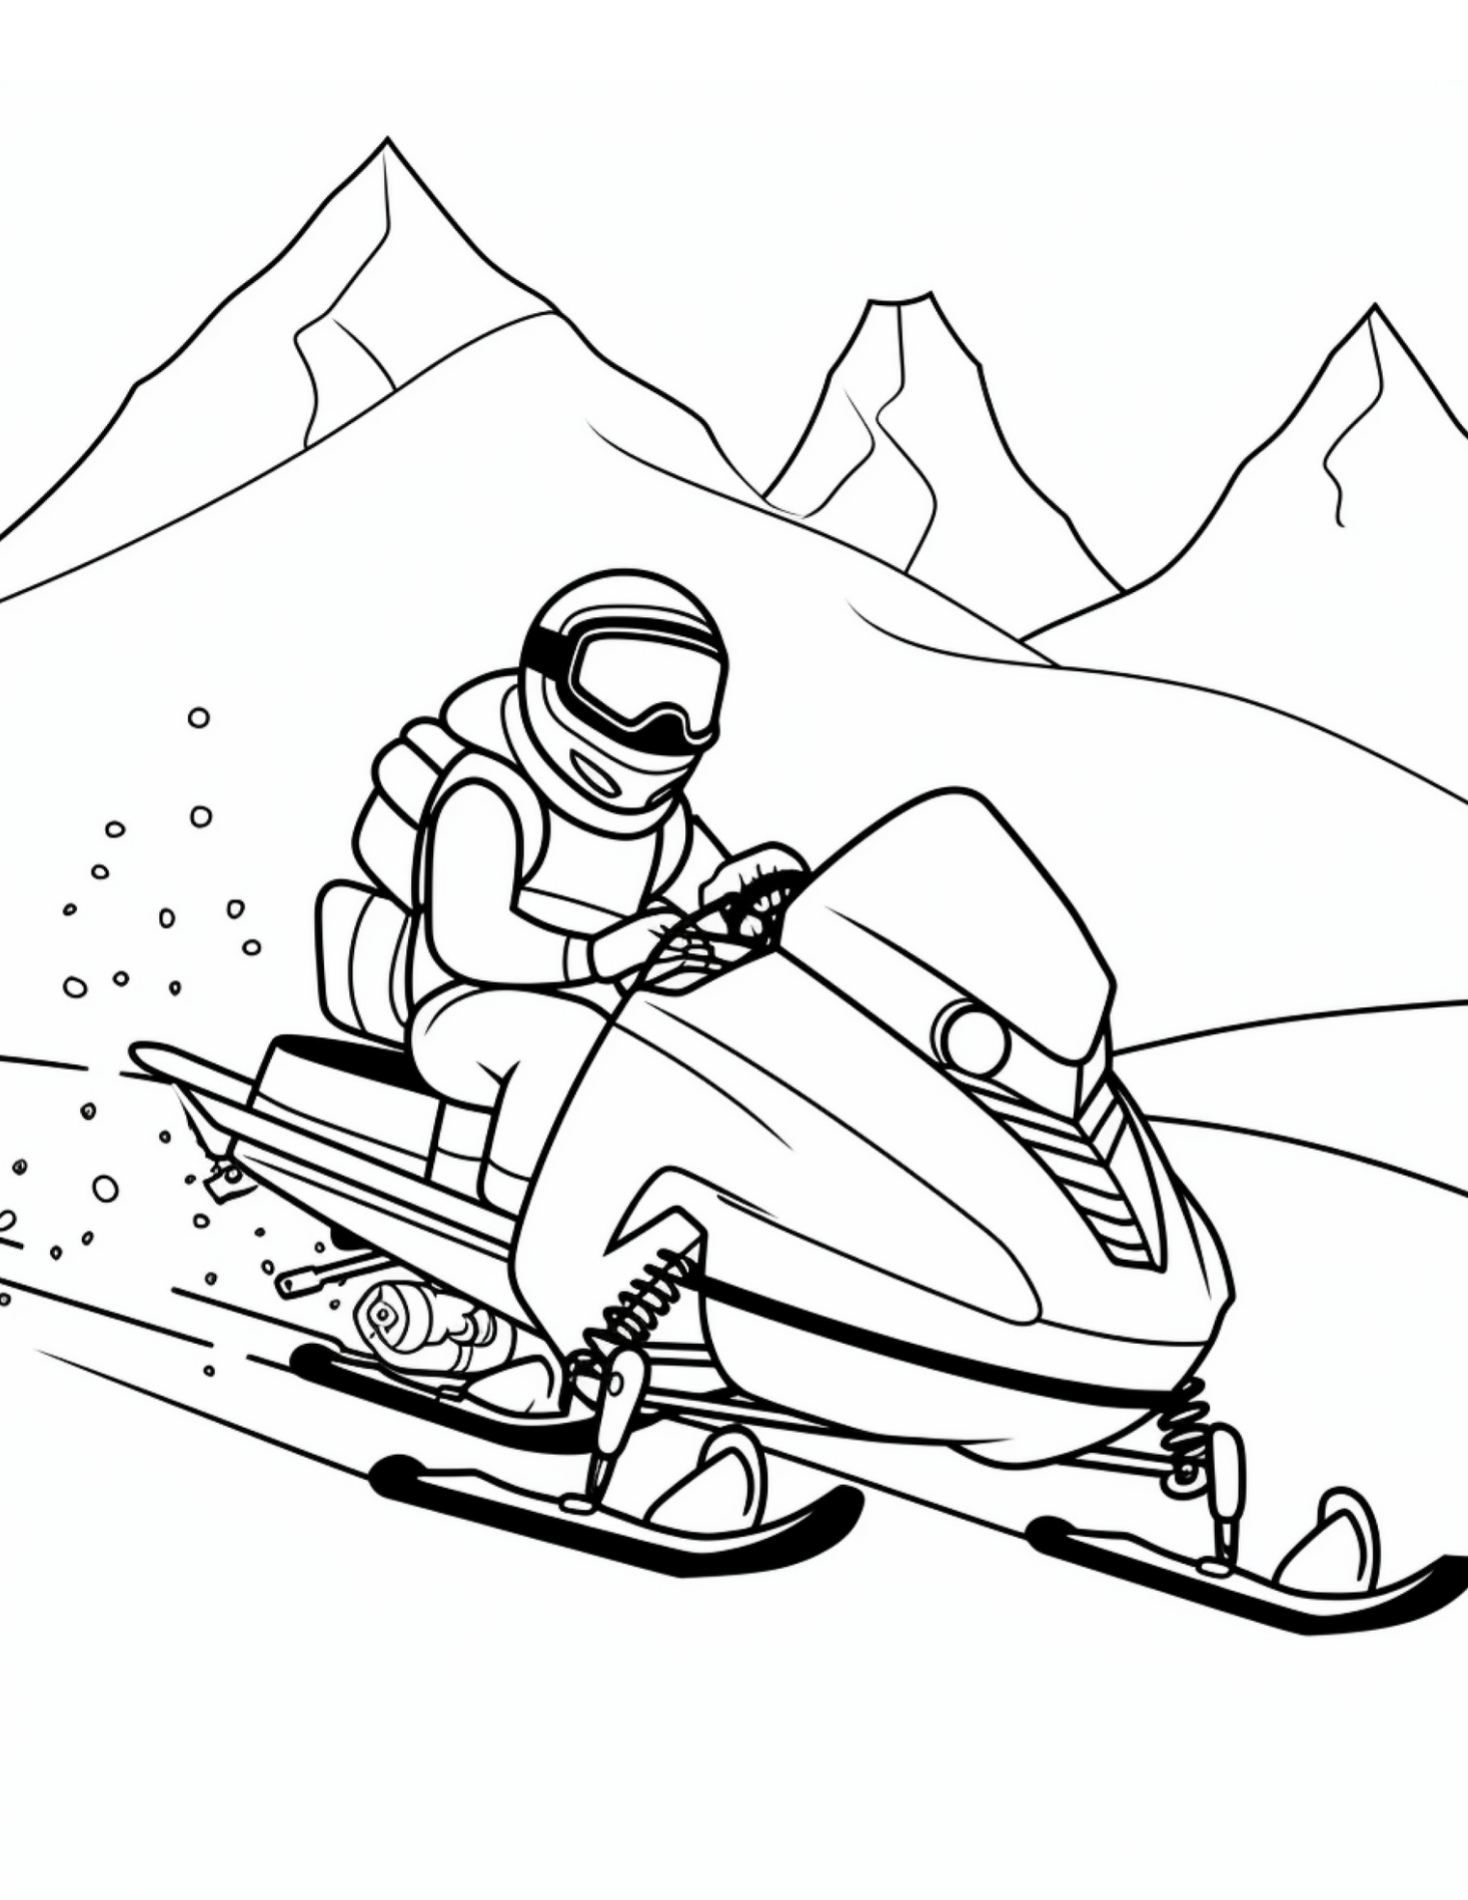 Snowmobile coloring pages